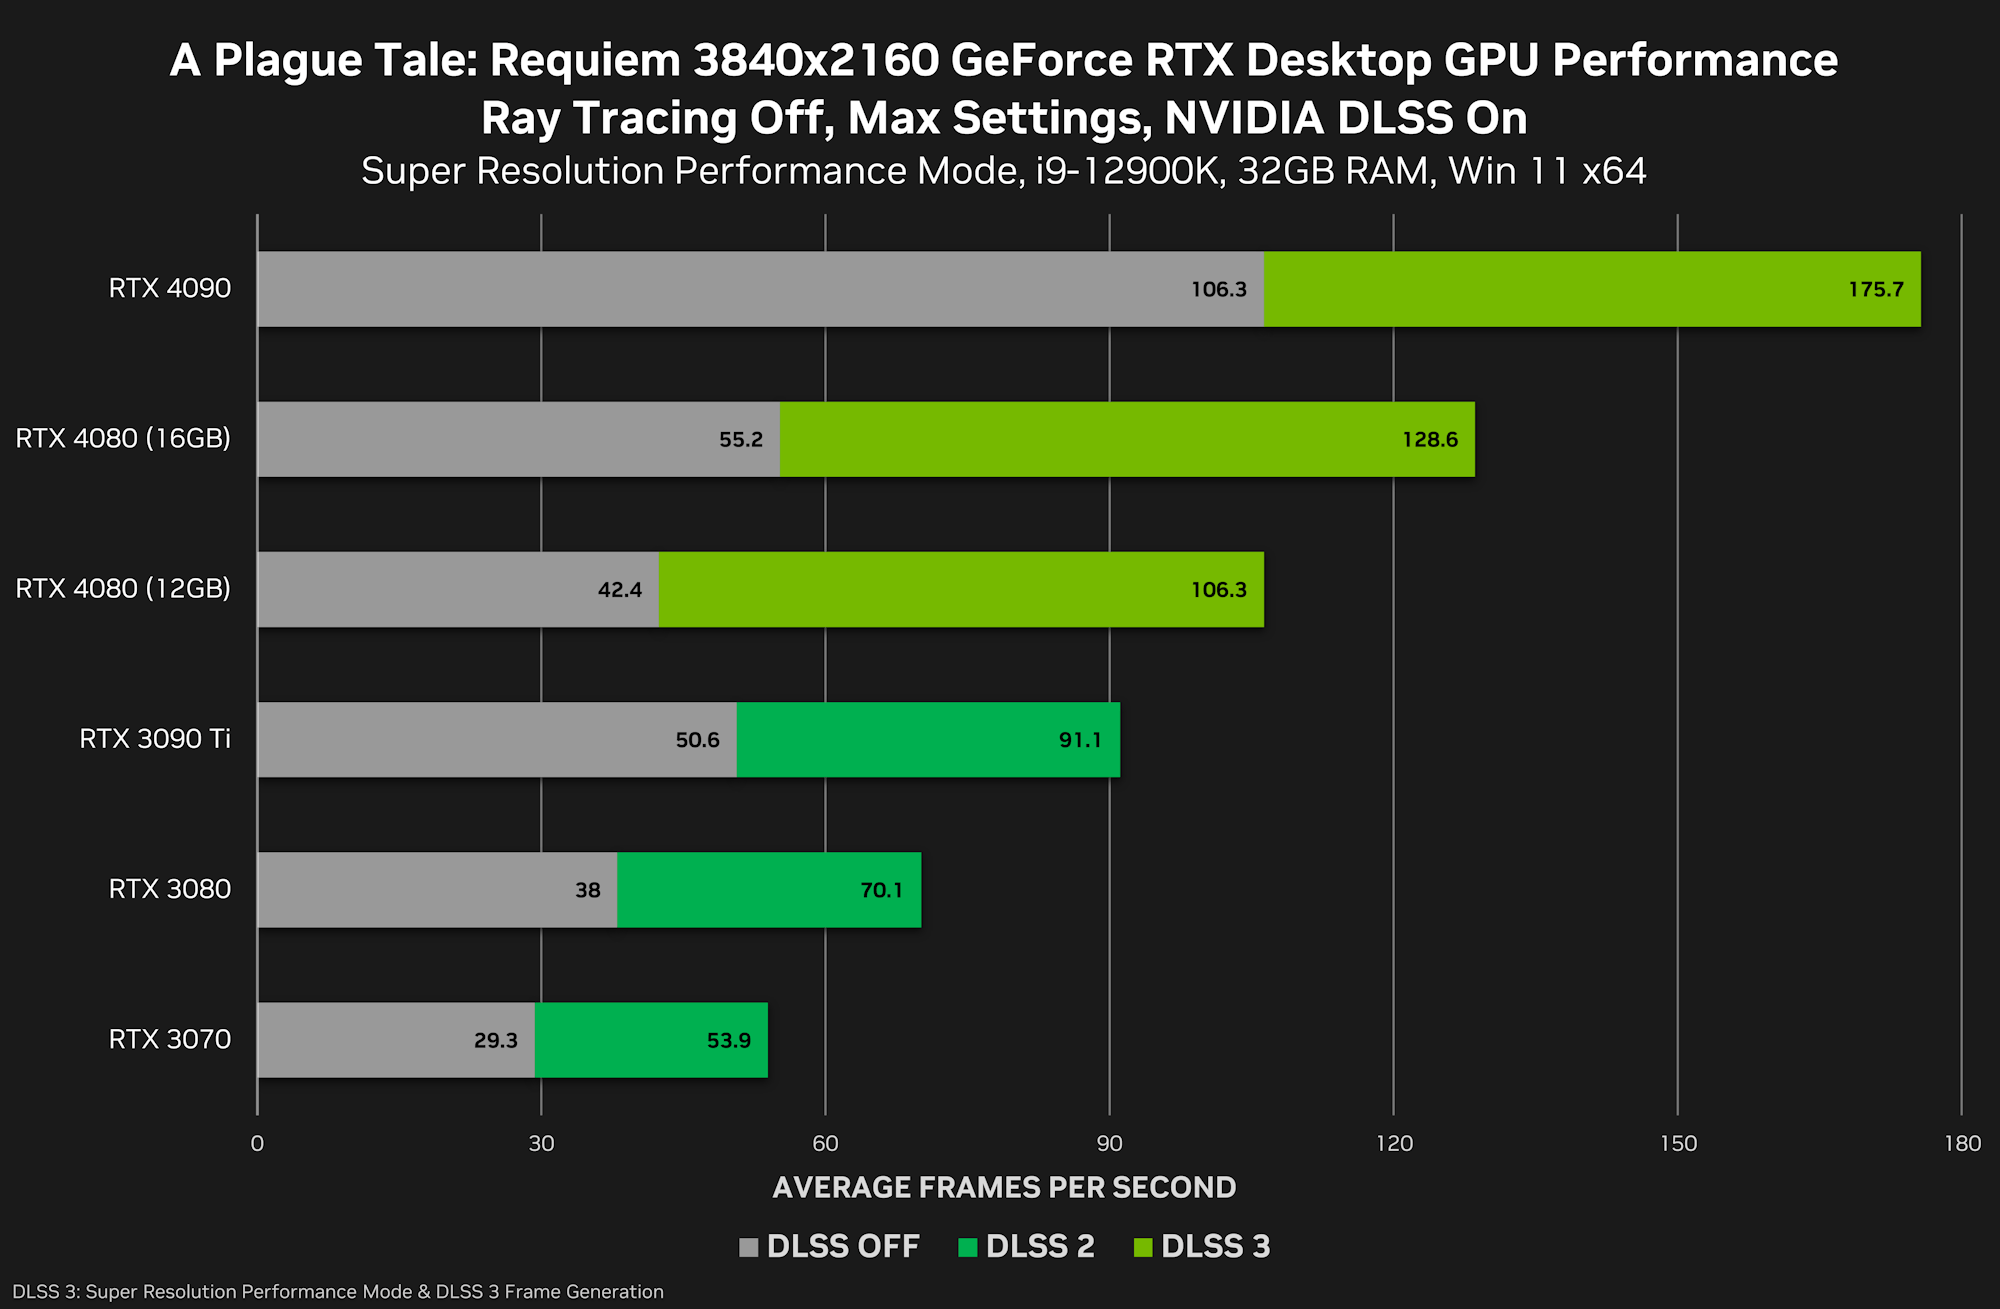 GeForce RTX 4080 16GB is up to 30 faster than 12GB version, according